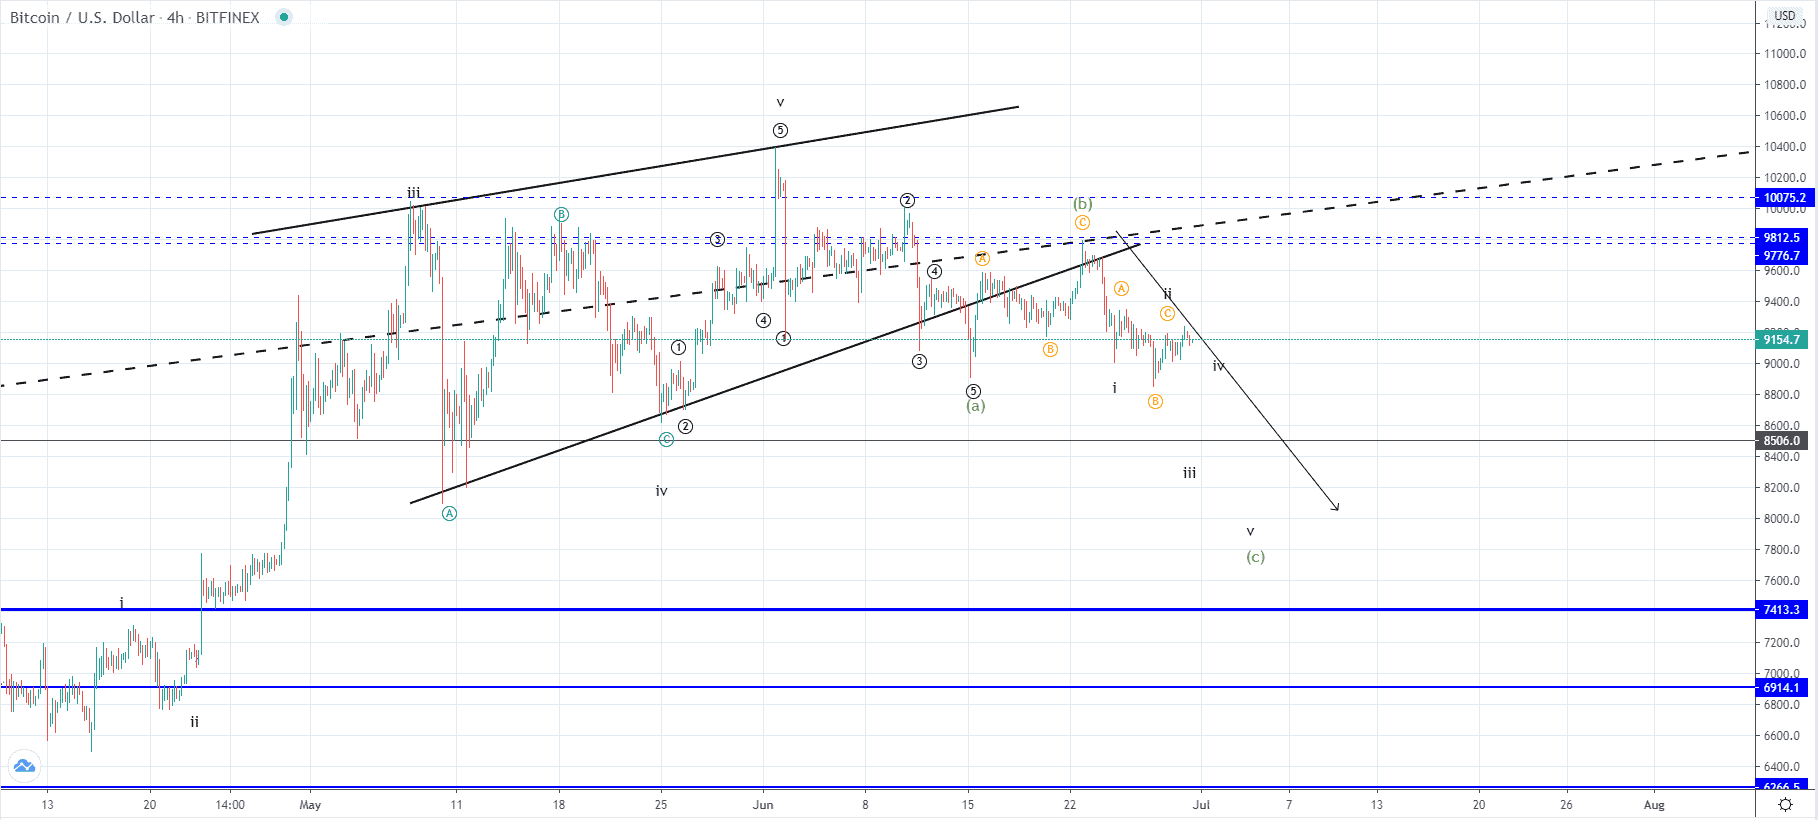 BTC and XRP — Correction or Long-Term Downtrend Developing?